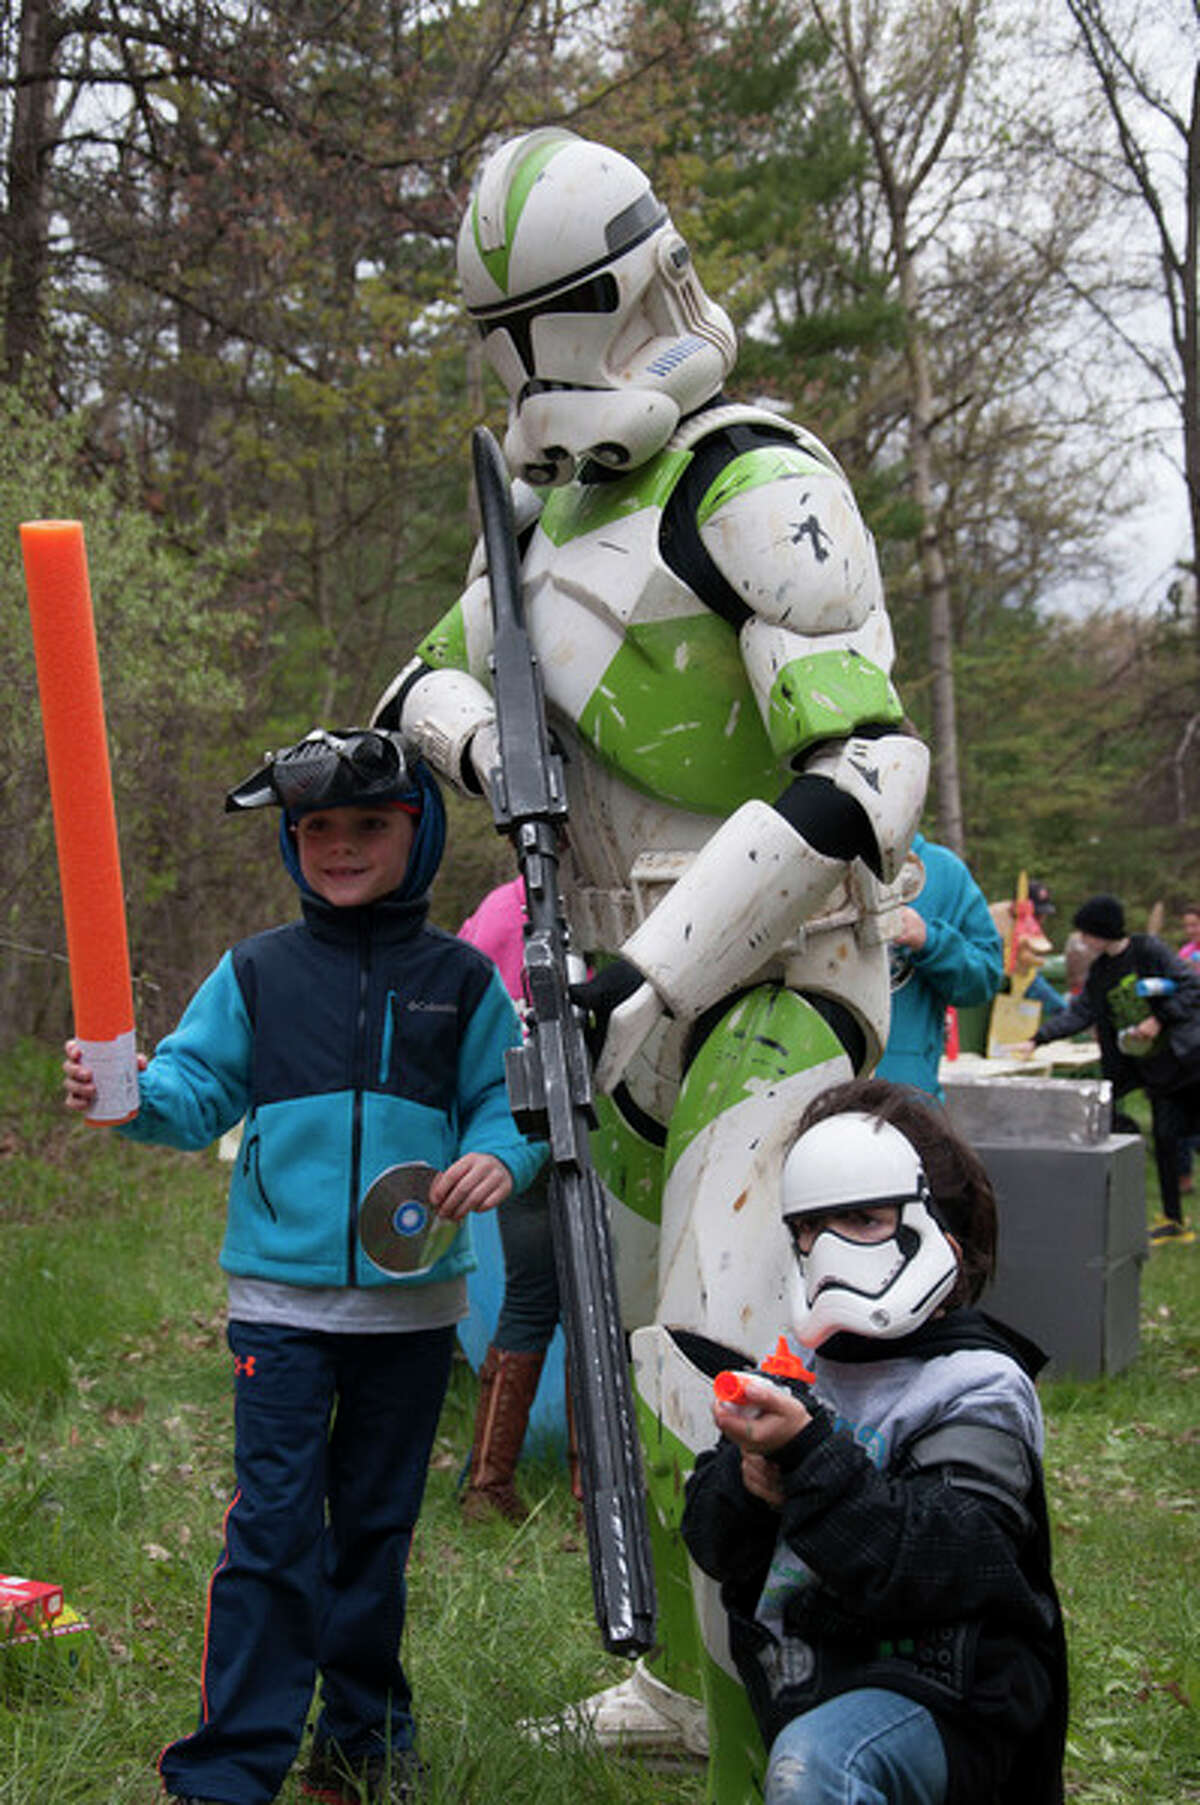 A scene from the Midland Recyclers Star Wars 5K Fun Run/Walk and one mile Jedi Training Course in 2016.